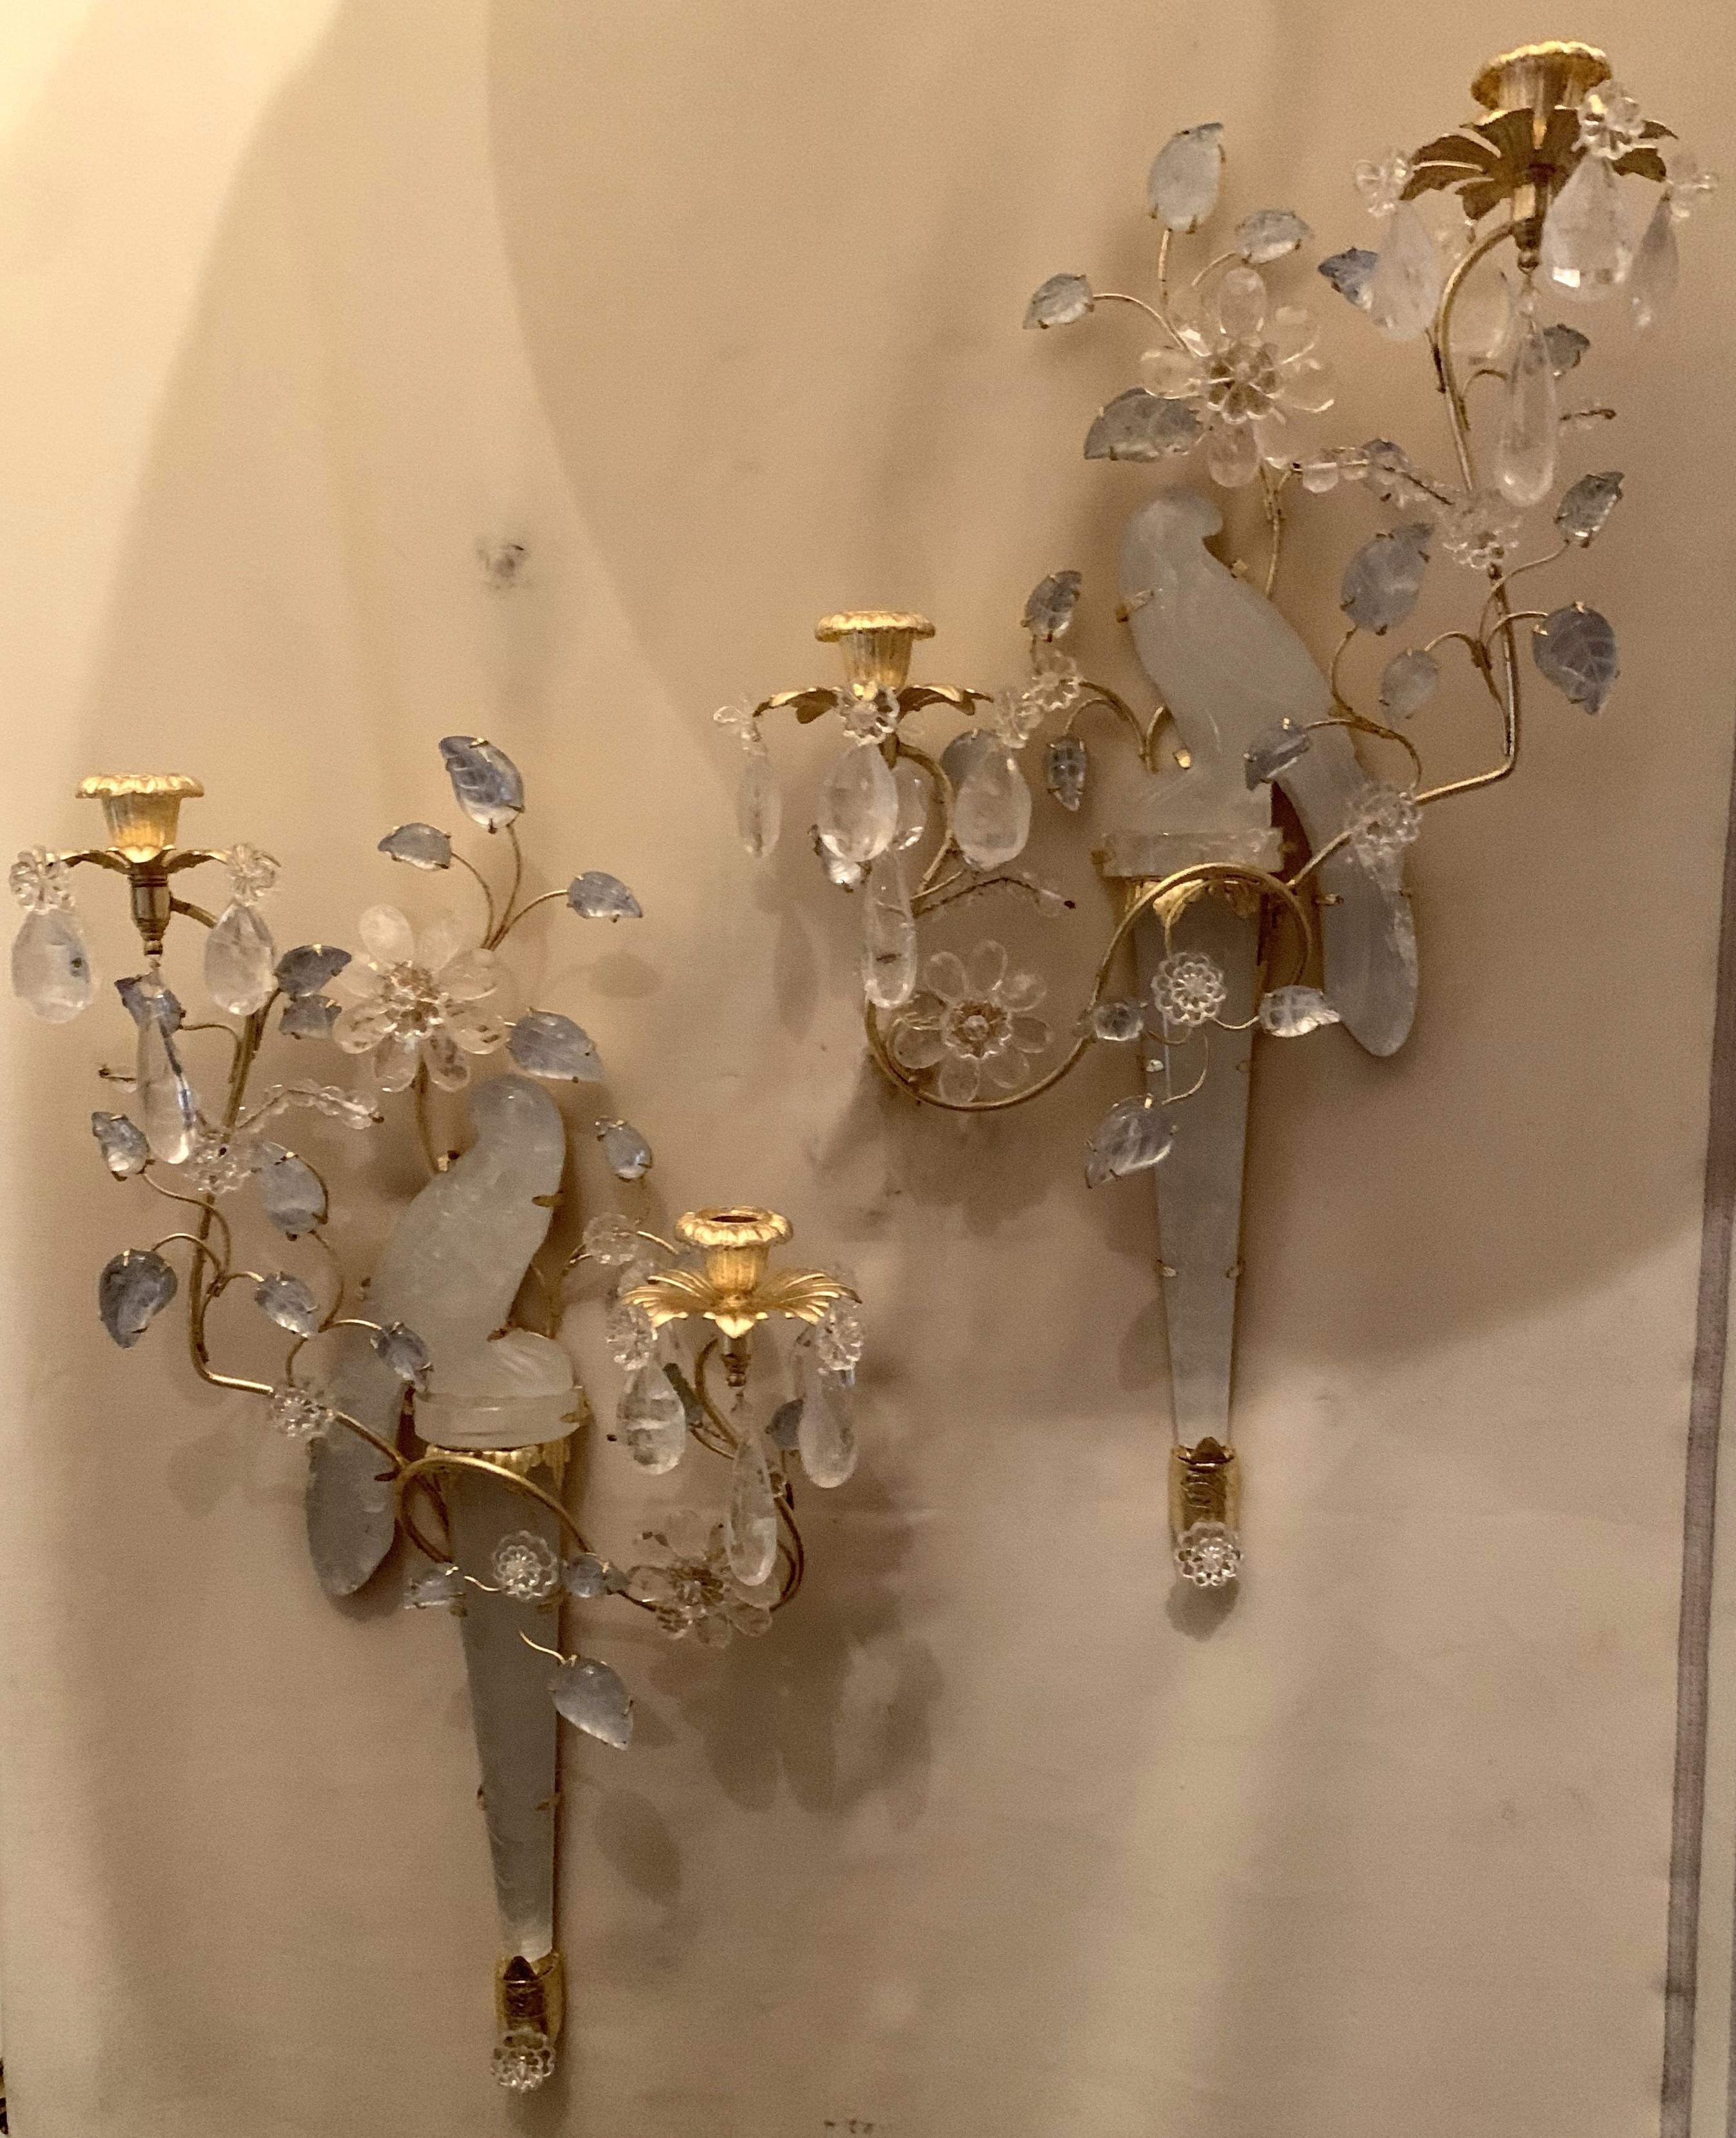 A wonderful pair of chinoiserie style rock crystal two-arm sconces with gold gilt birds facing one another with flowers and leaves throughout, in the manner of Baguès & Sherle Wagner.
Two pairs available
Currently not electrified
$250 to have